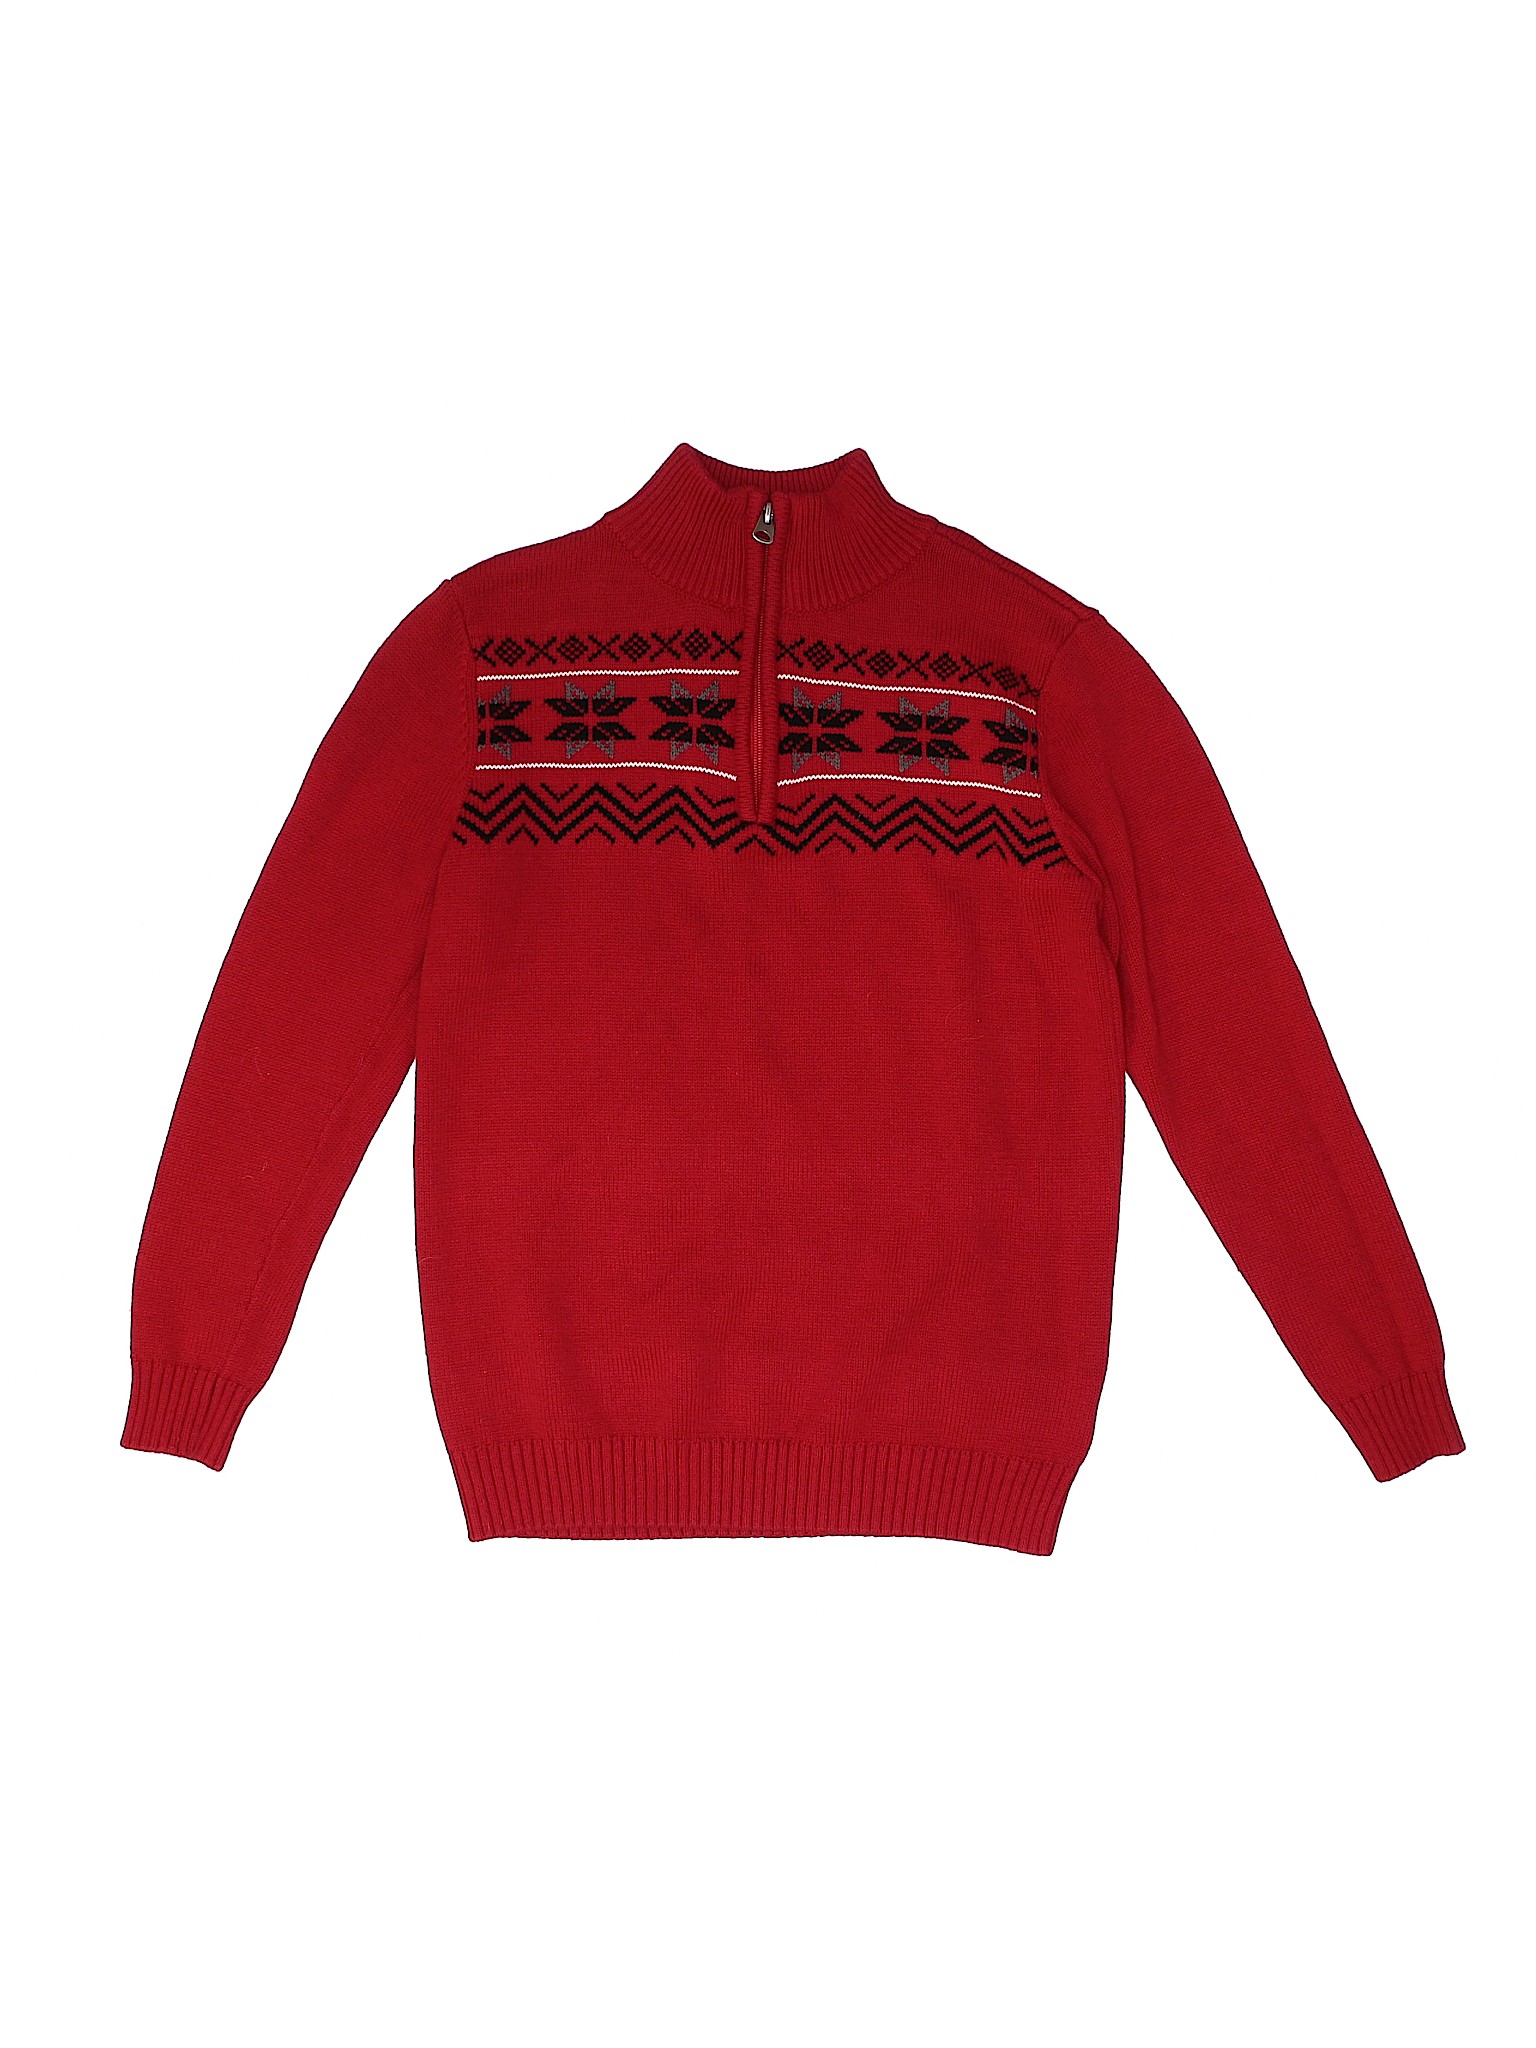 Urban Pipeline Boys Red Pullover Sweater M Youth | eBay